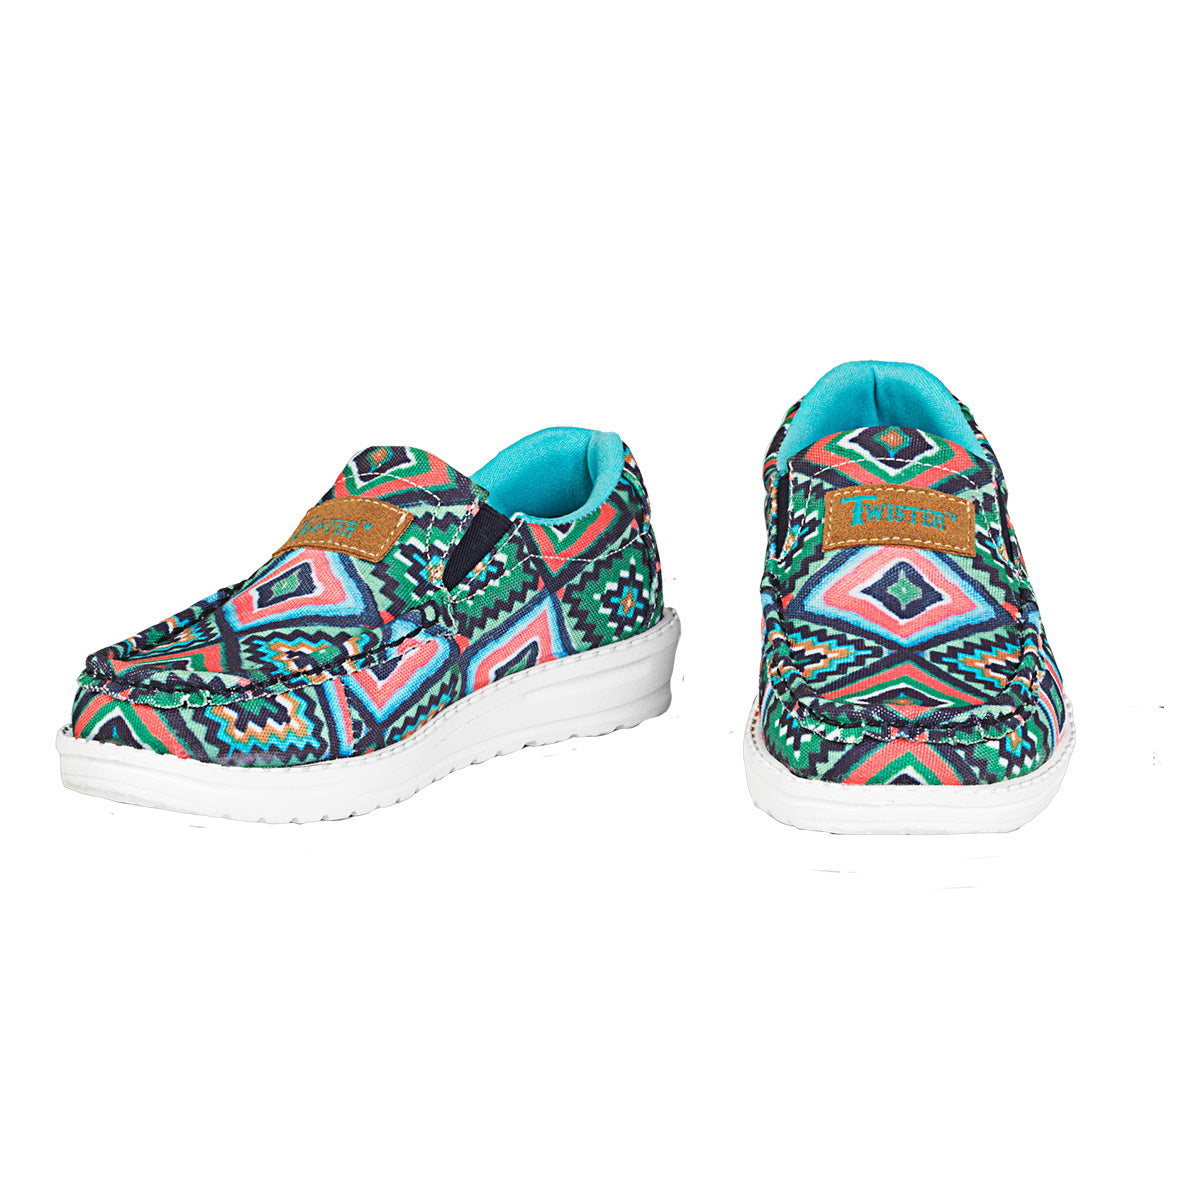 TWISTER "ISLA" CASUAL TODDLER GIRLS SHOES - MULTICOLOR